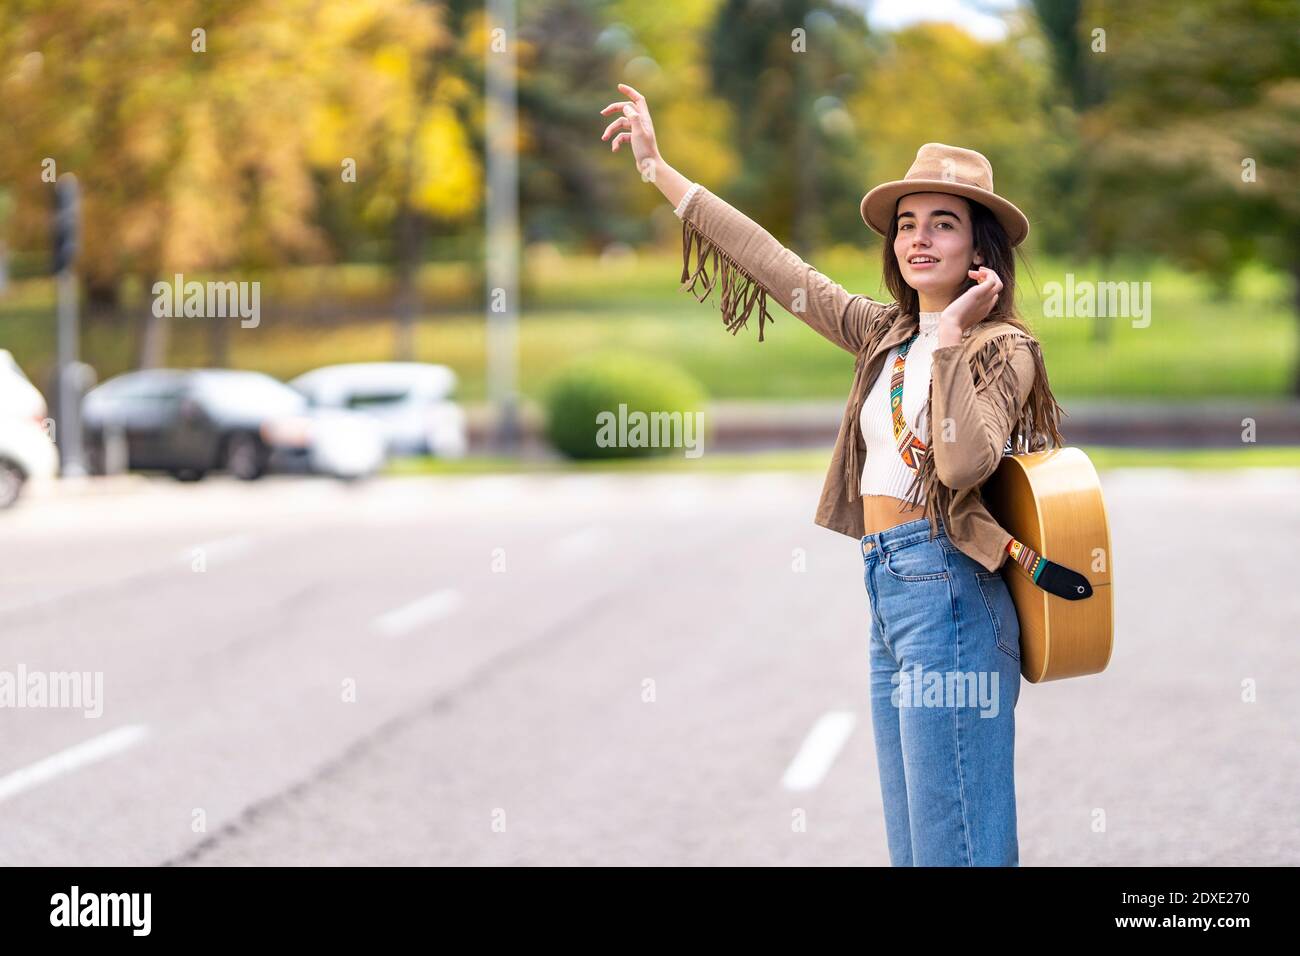 Young musician waving hand on street Stock Photo